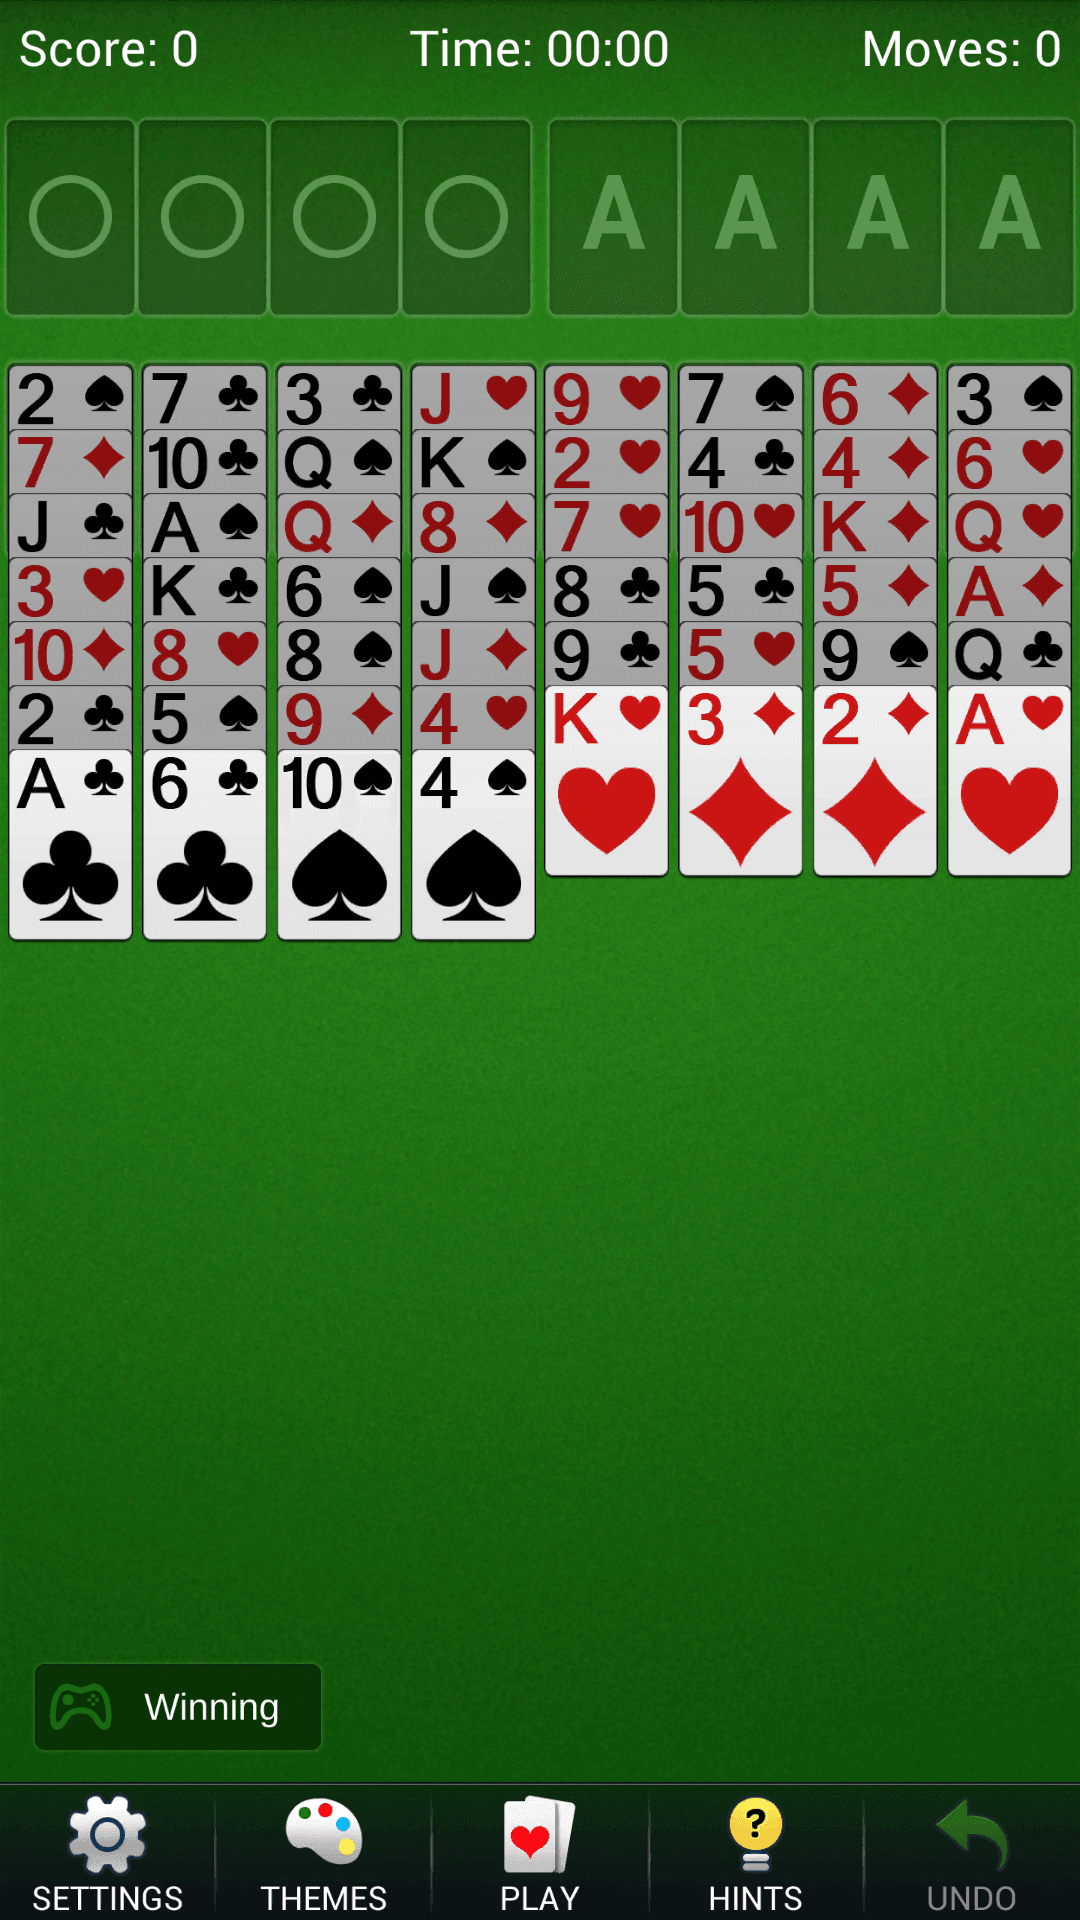 Screenshot 1 of FreeCell Solitaire - Card Game 1.16.1.20221025